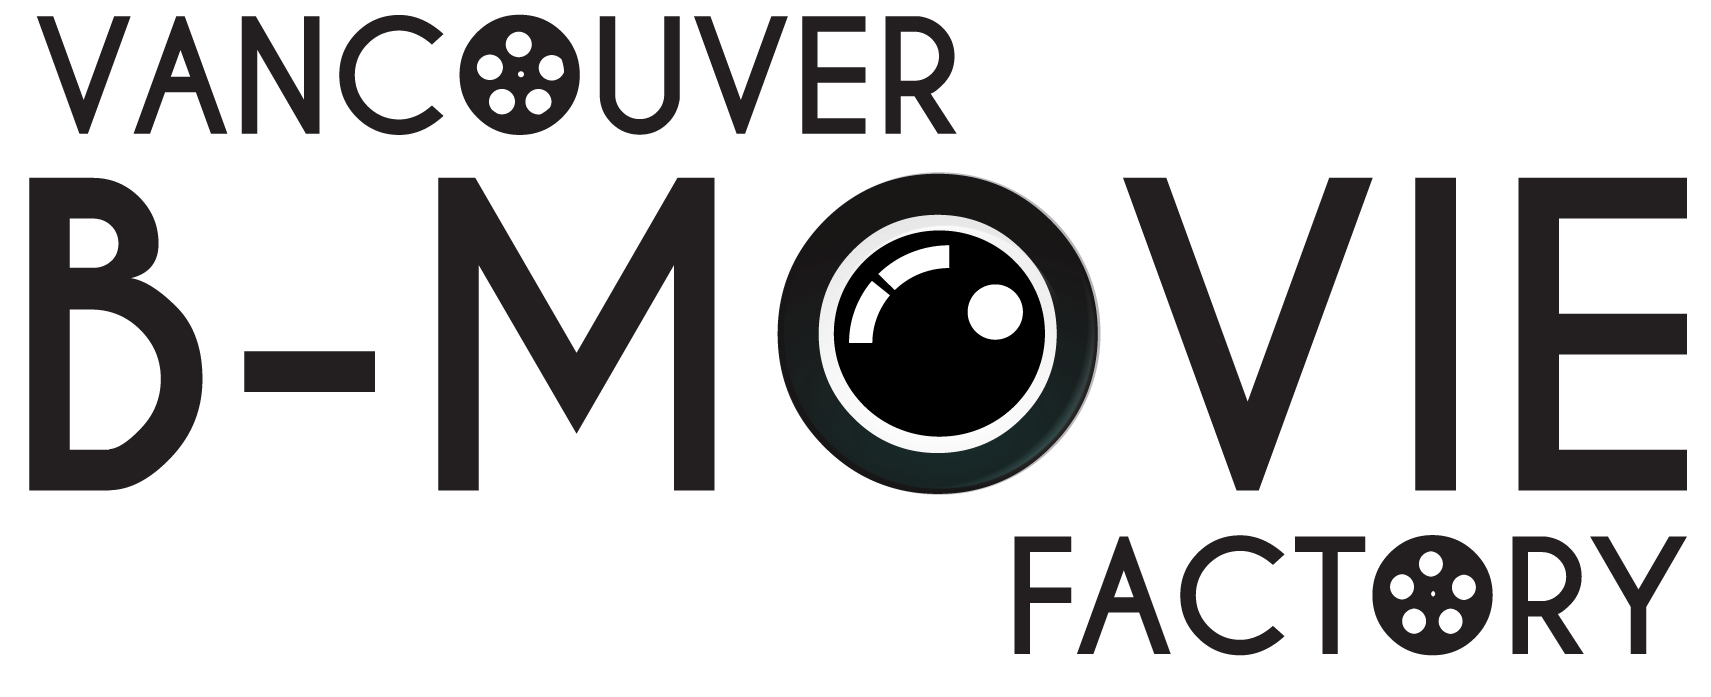 The Vancouver B - Movie Factory